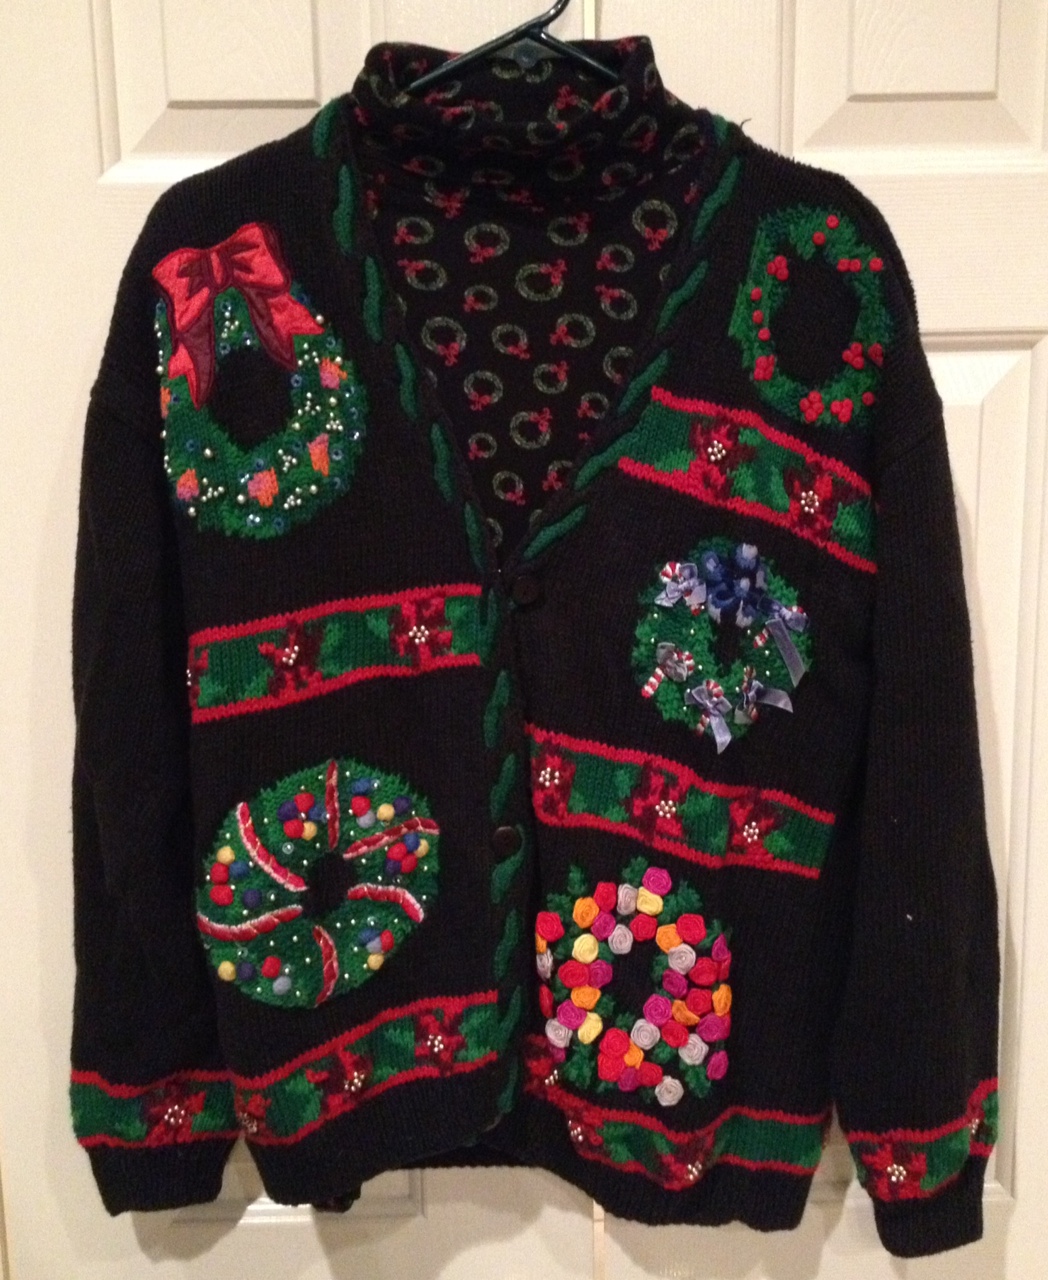 Ugly Christmas Sweater Party Ideas - Lake Travis Lifestyle